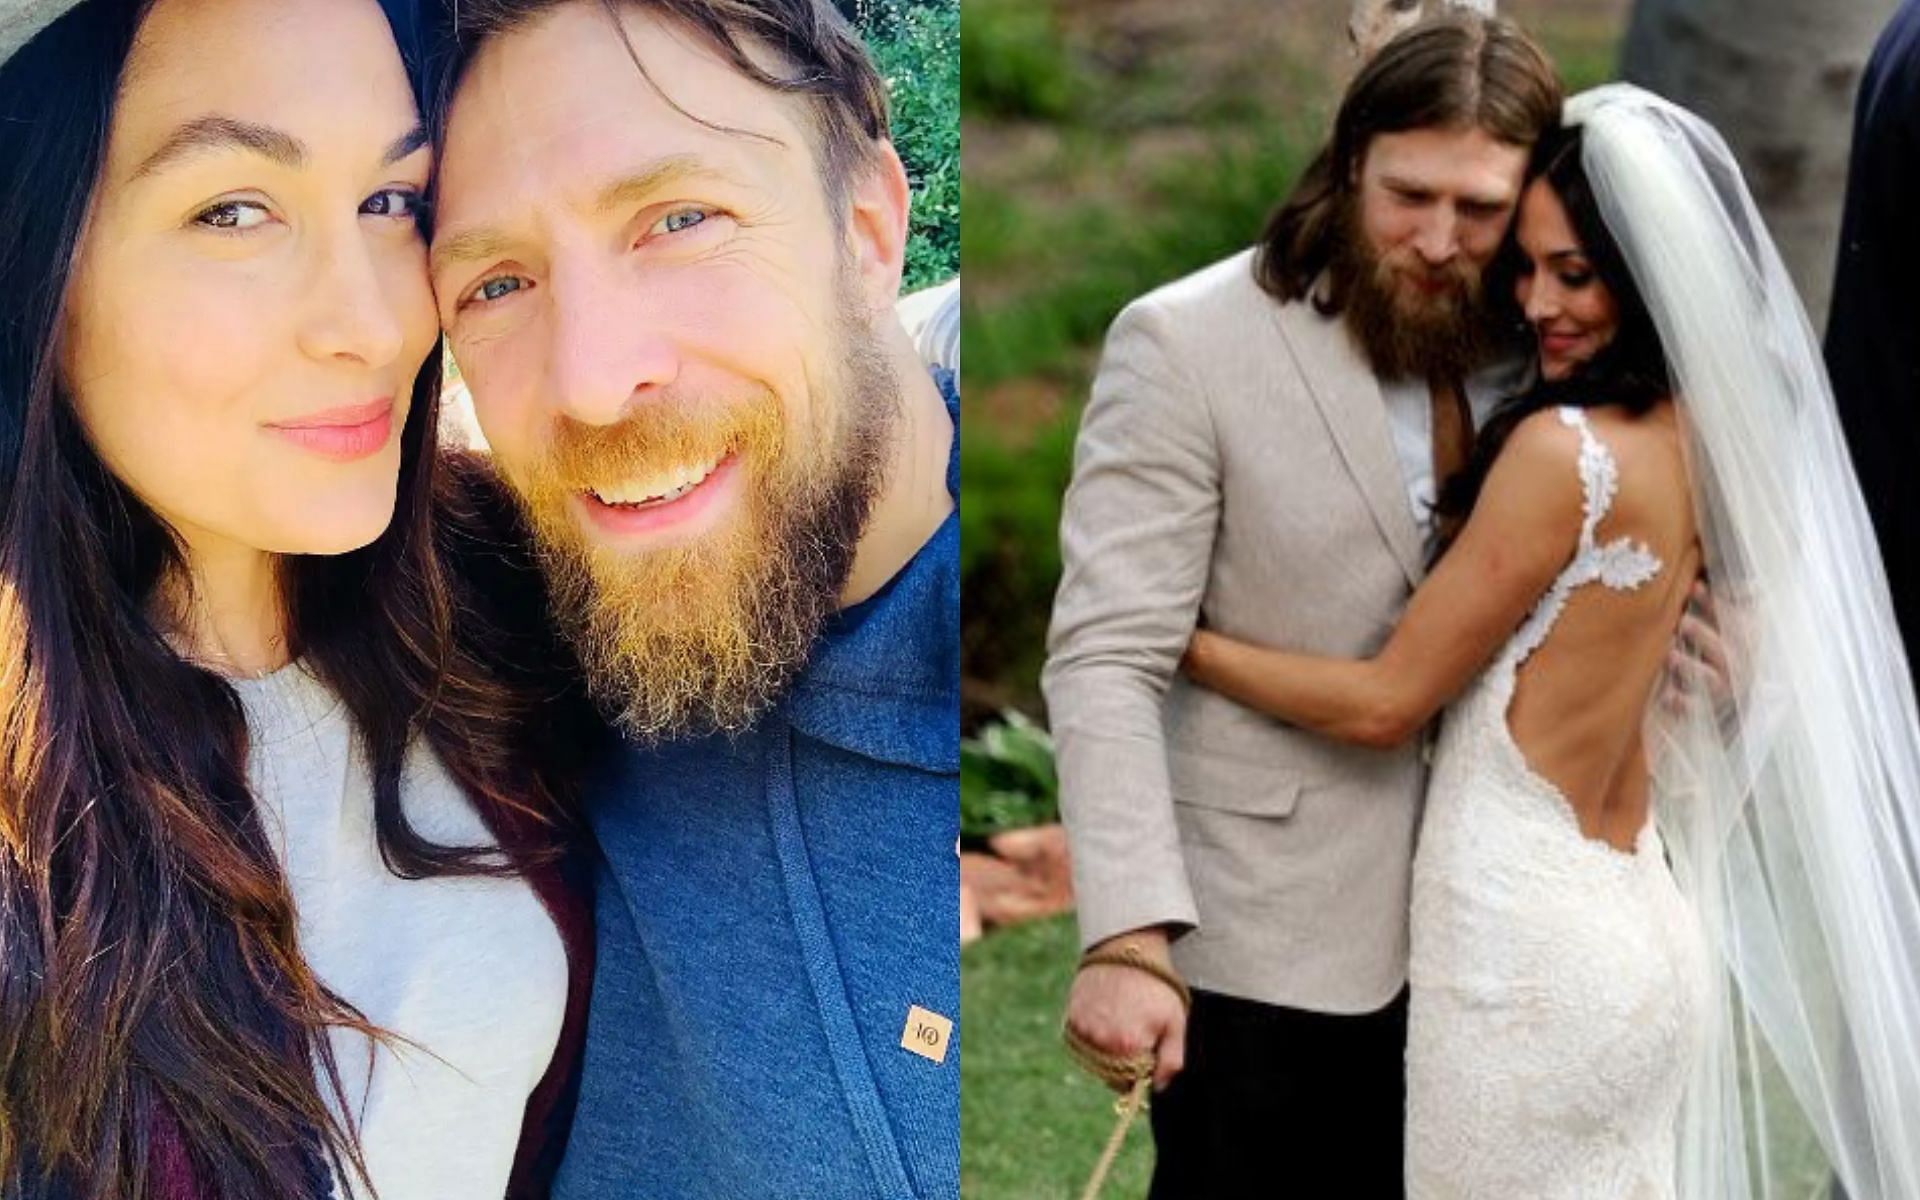 Bryan Danielson and Brie Bella tied the knot in 2014